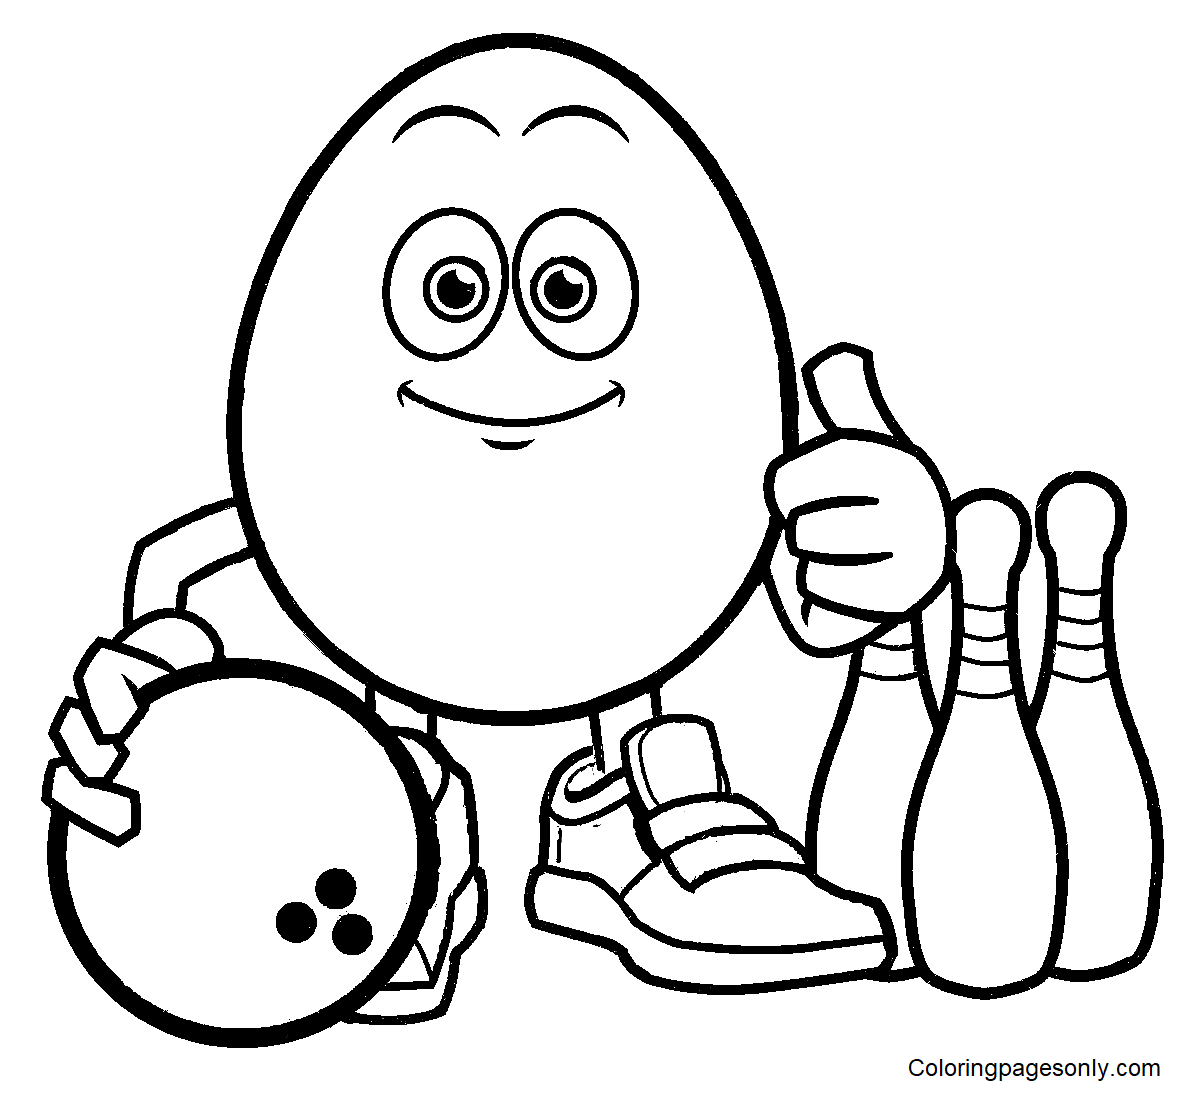 Egg Playing Bowling Coloring Pages